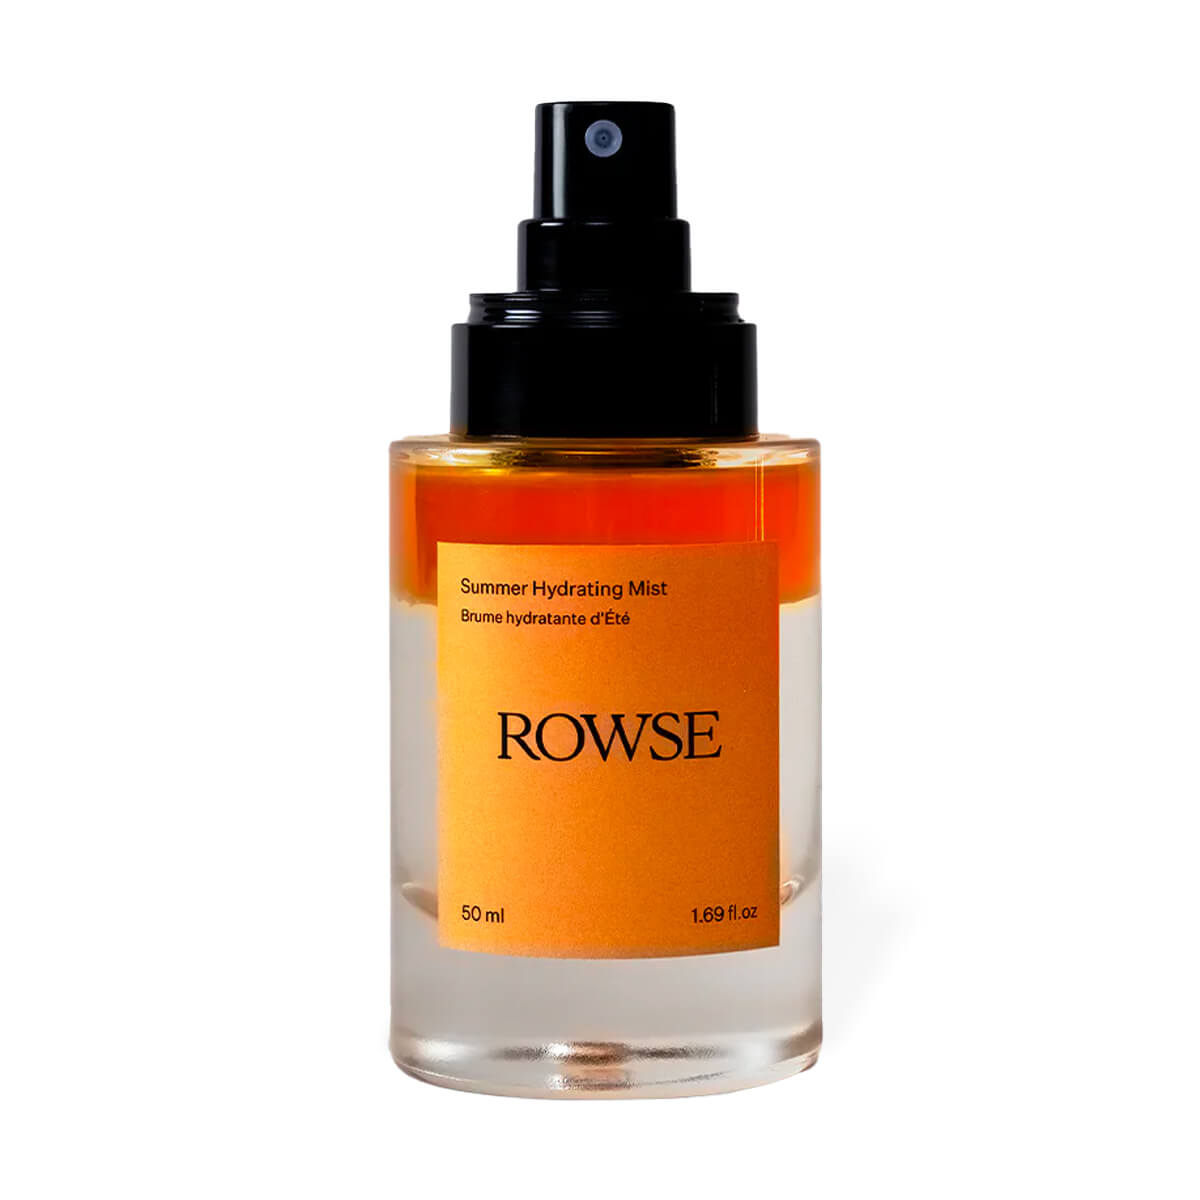 SUMMER HYDRATING MIST by ROWSE Beauty